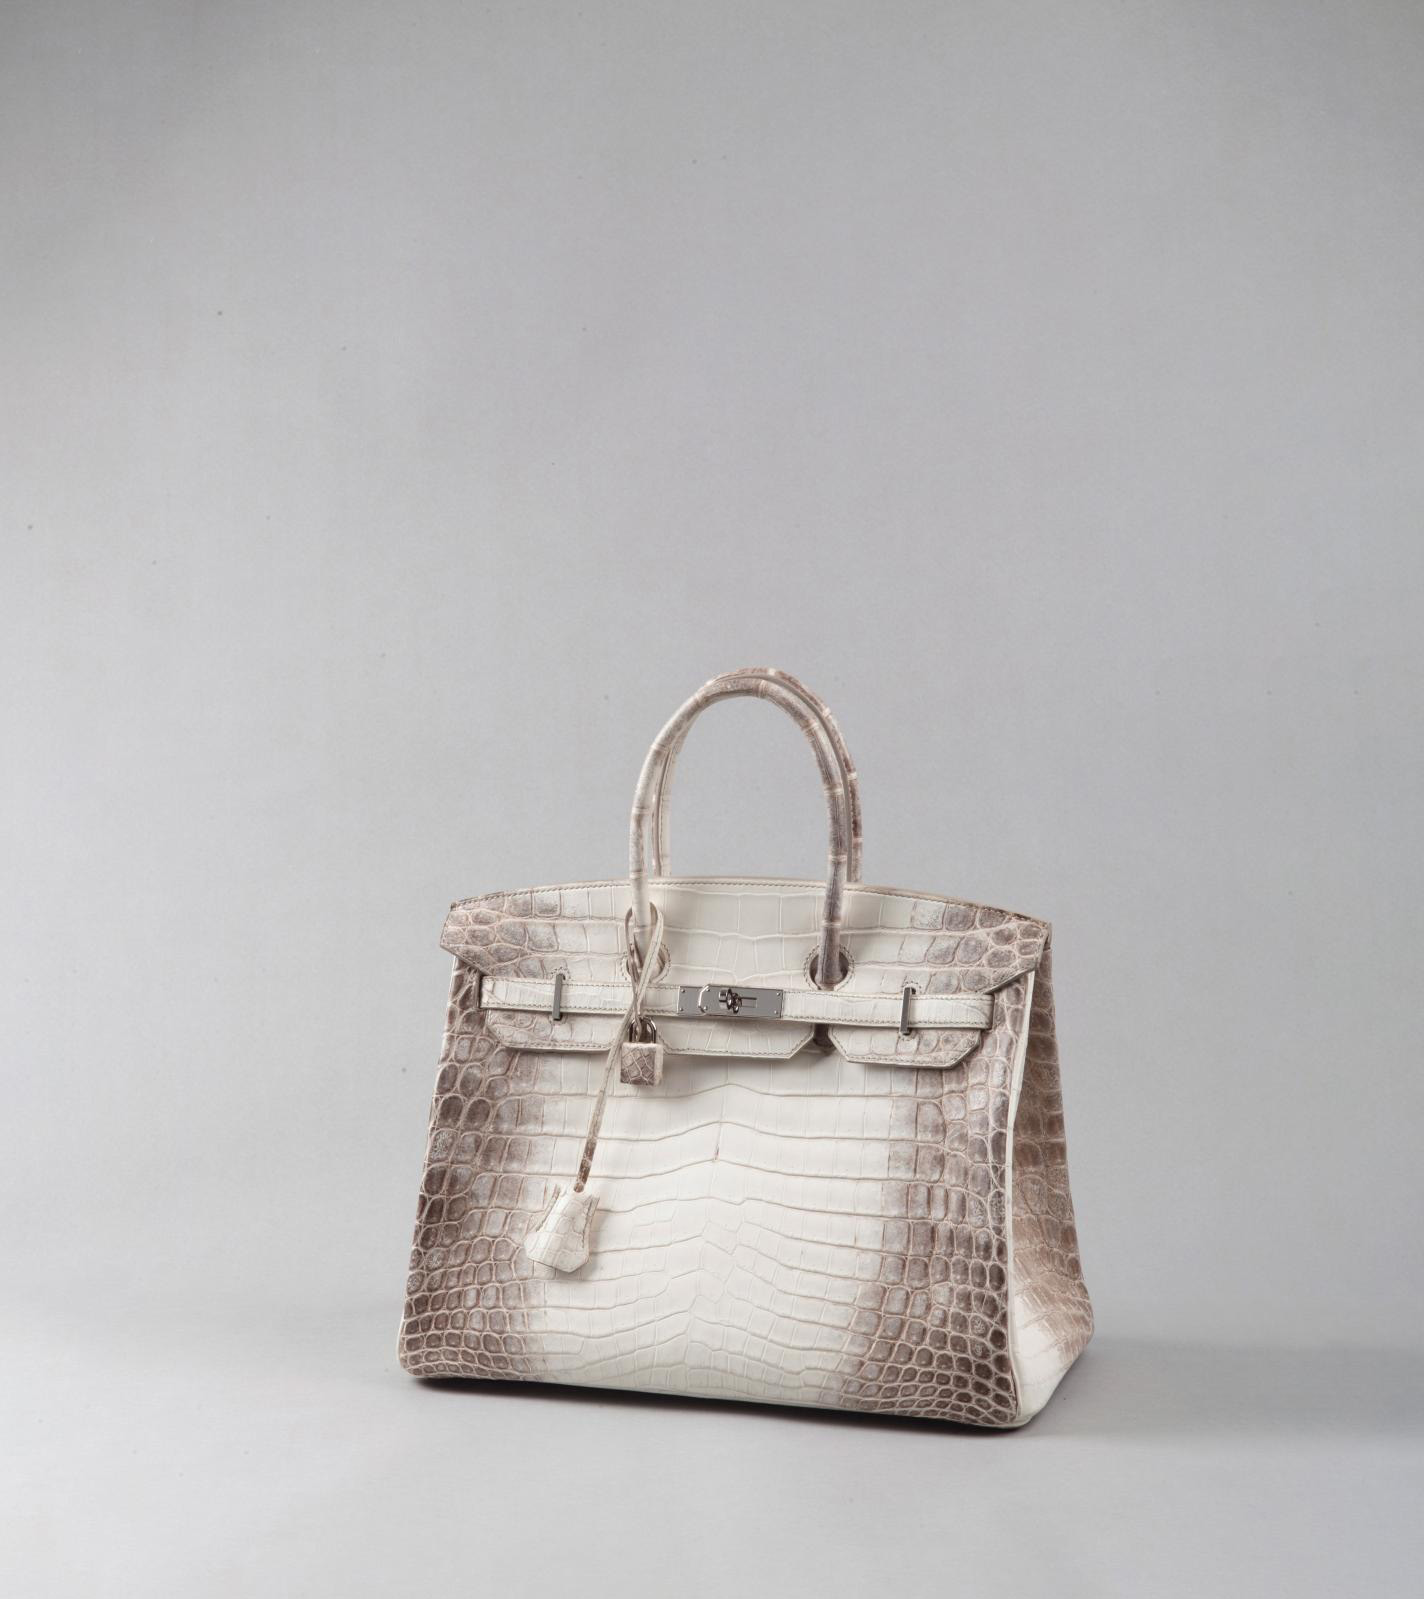 Art Price Index: The Birkin Bag by Hermès, a Solid Investment 